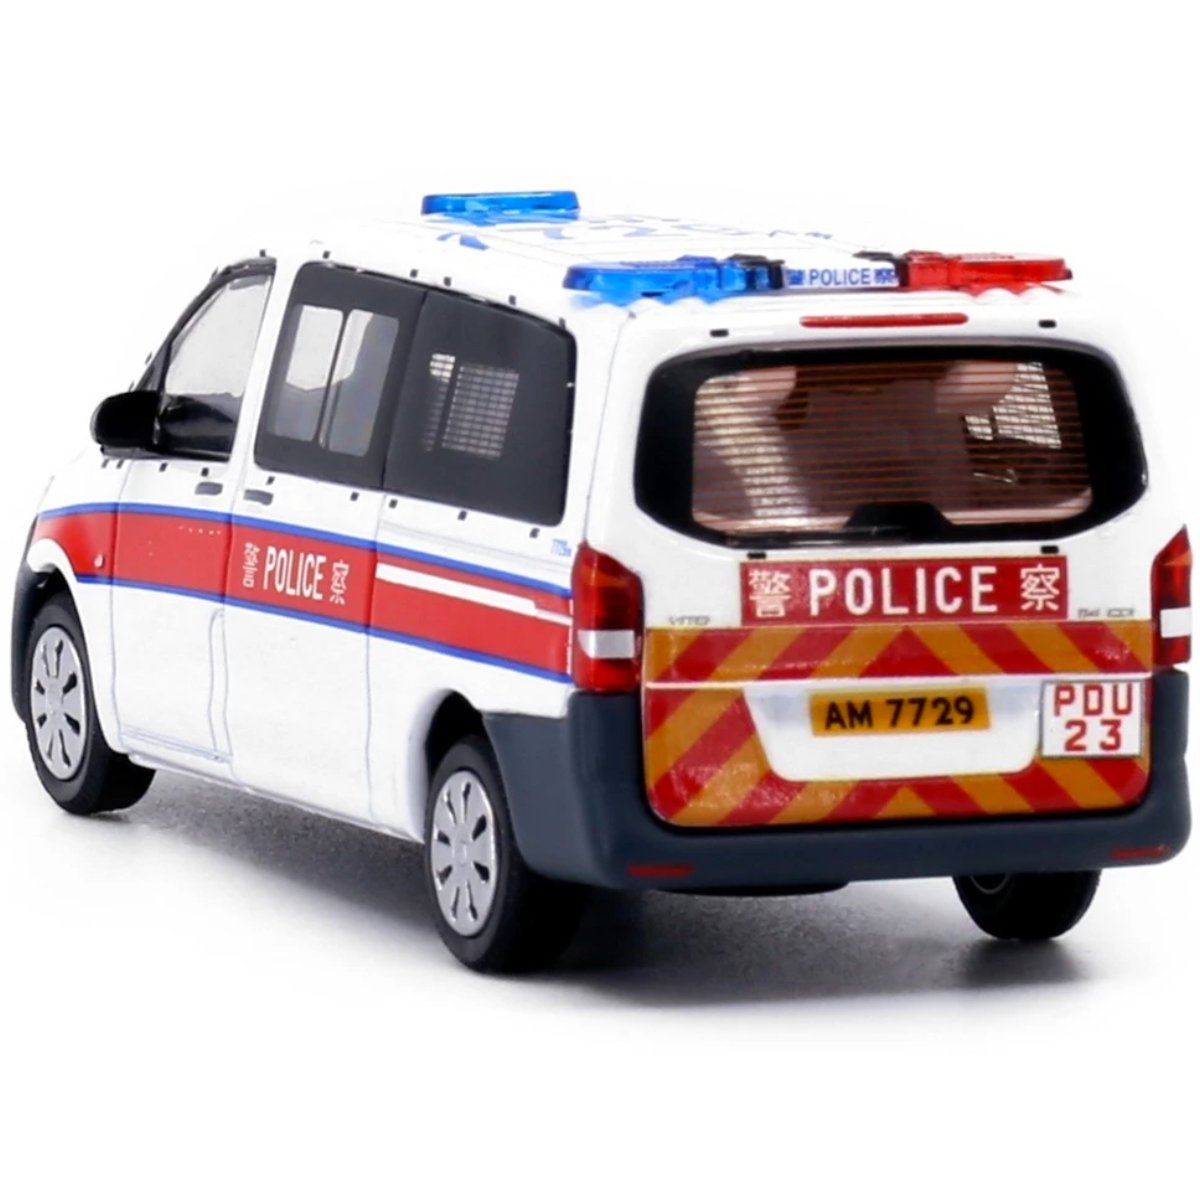 Tiny Models Mercedes-Benz Vito Hong Kong Police (1:64 Scale) - Phillips Hobbies